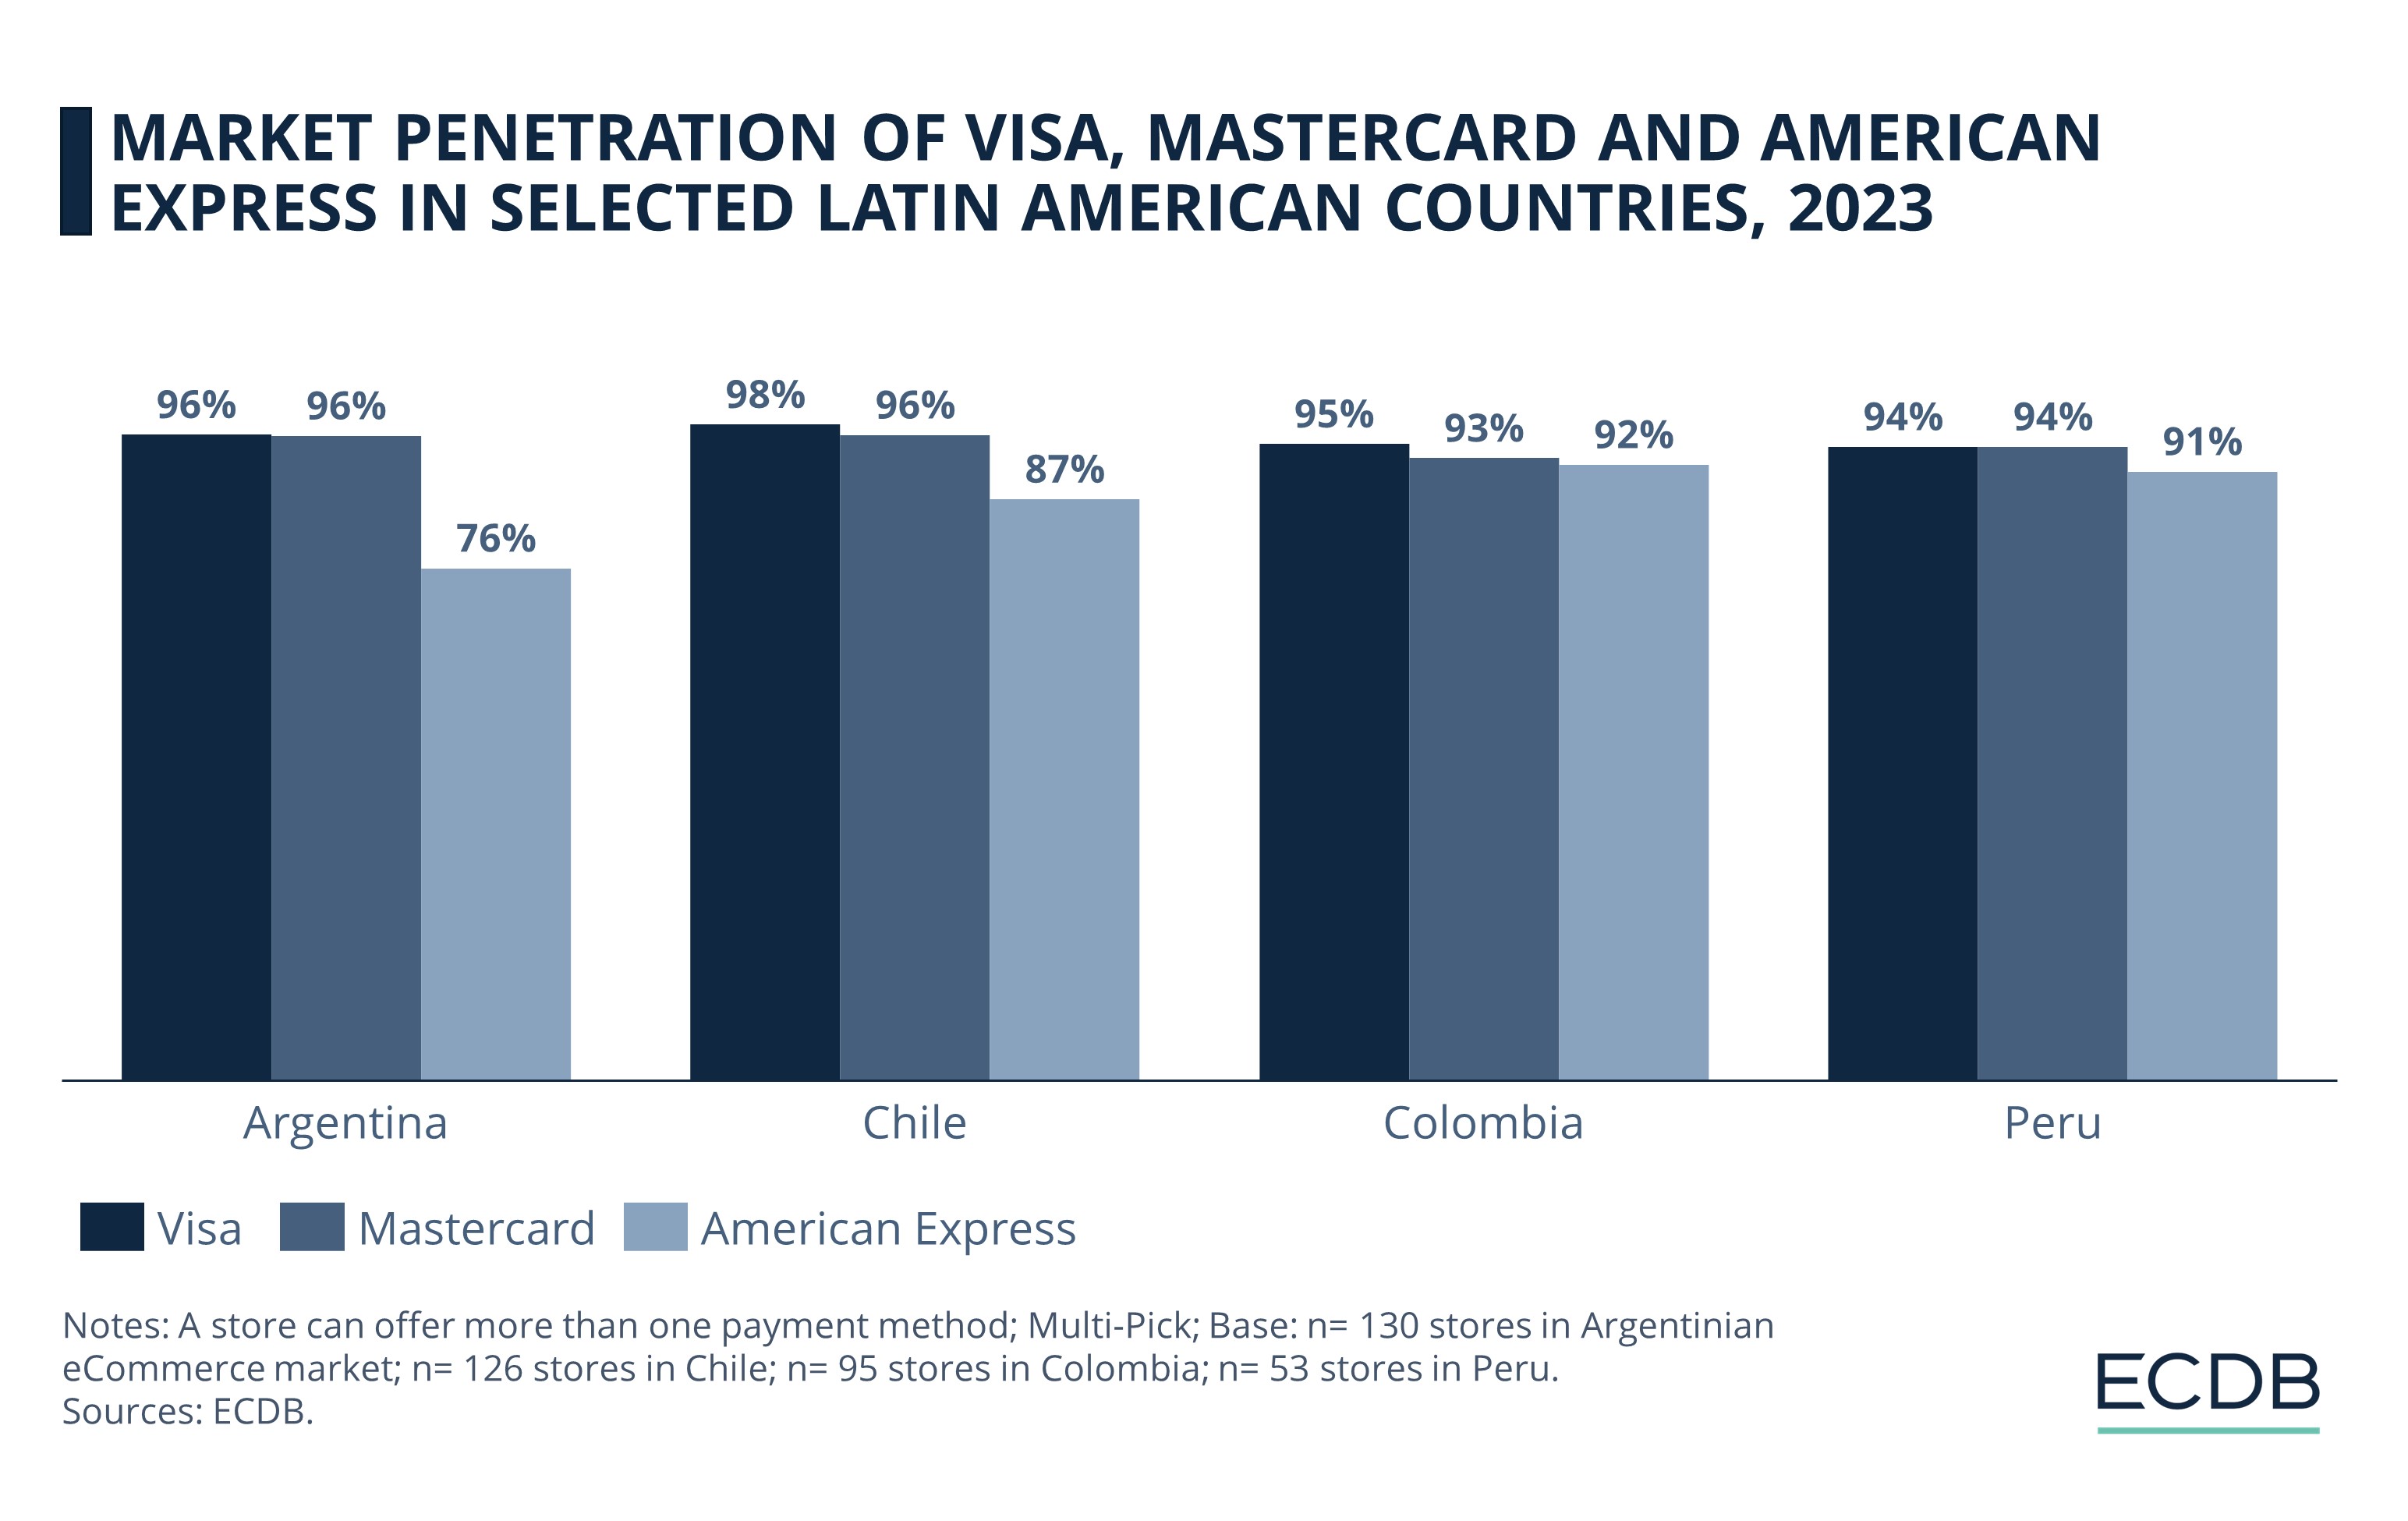 Market Penetration of Visa, Mastercard And American Express in Selected Latin American Countries, 2023